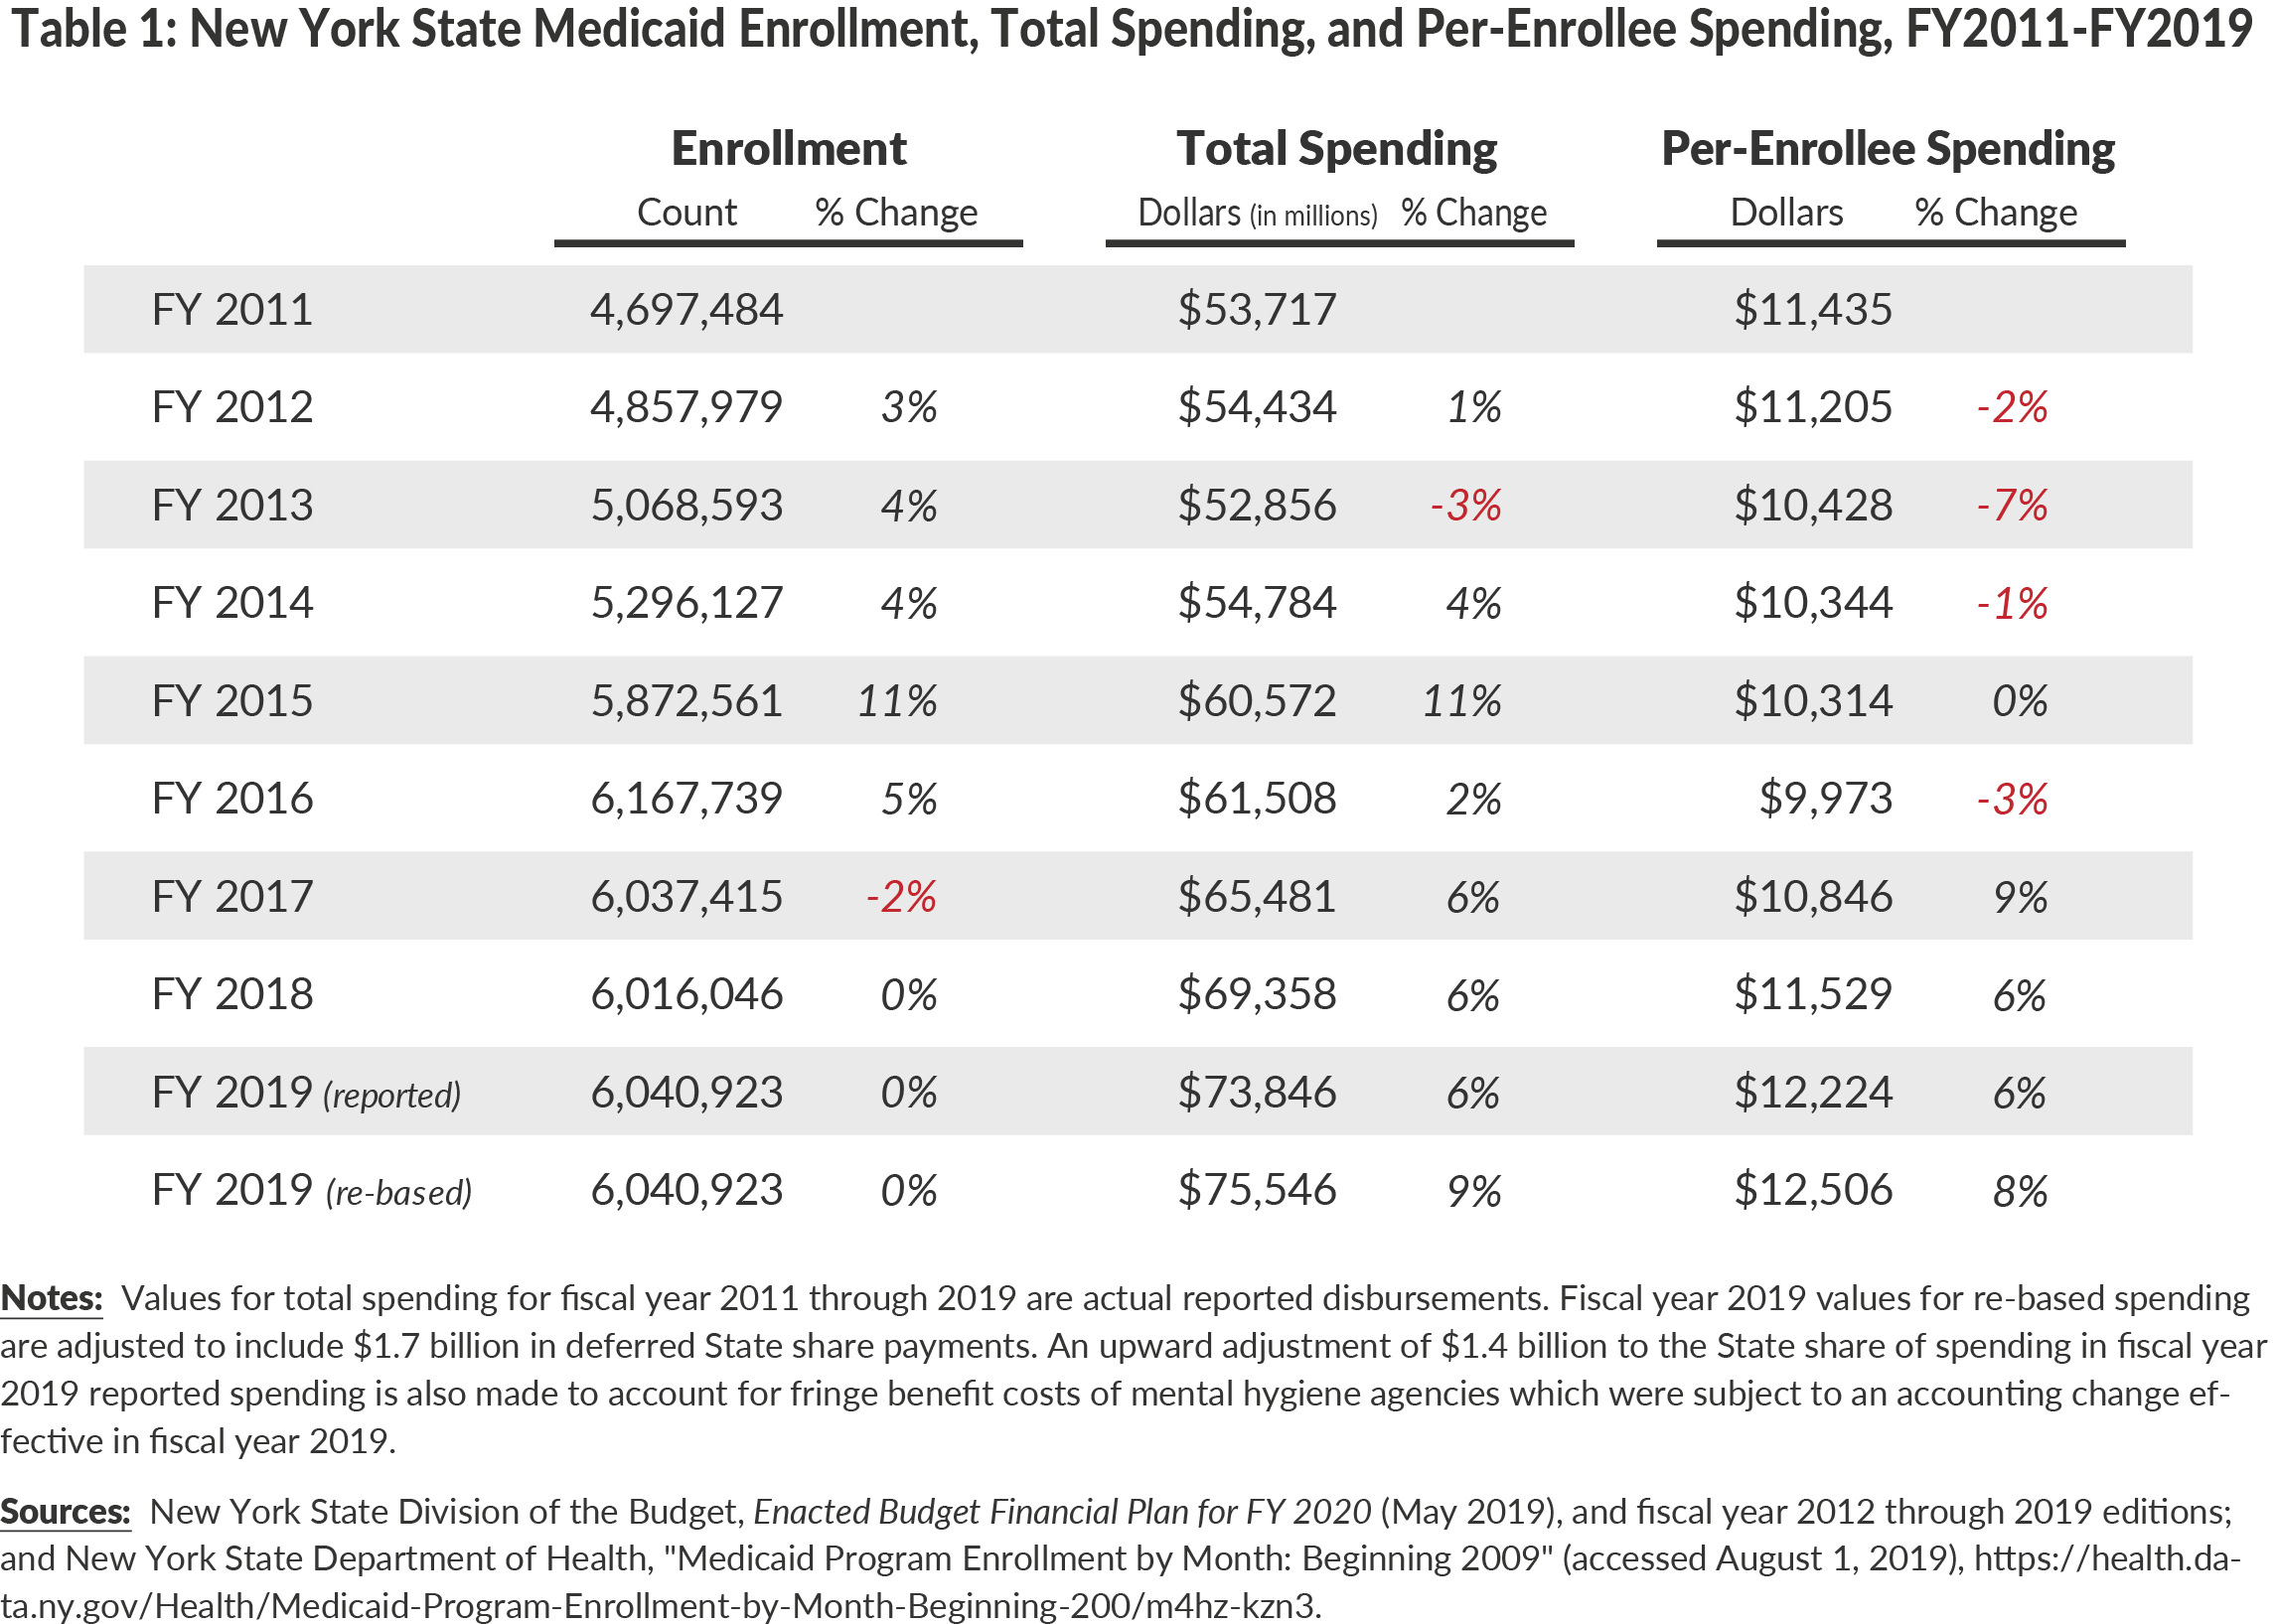 Table 1: New York State Medicaid Enrollment and Spending, Fiscal Years 2011 through 2019